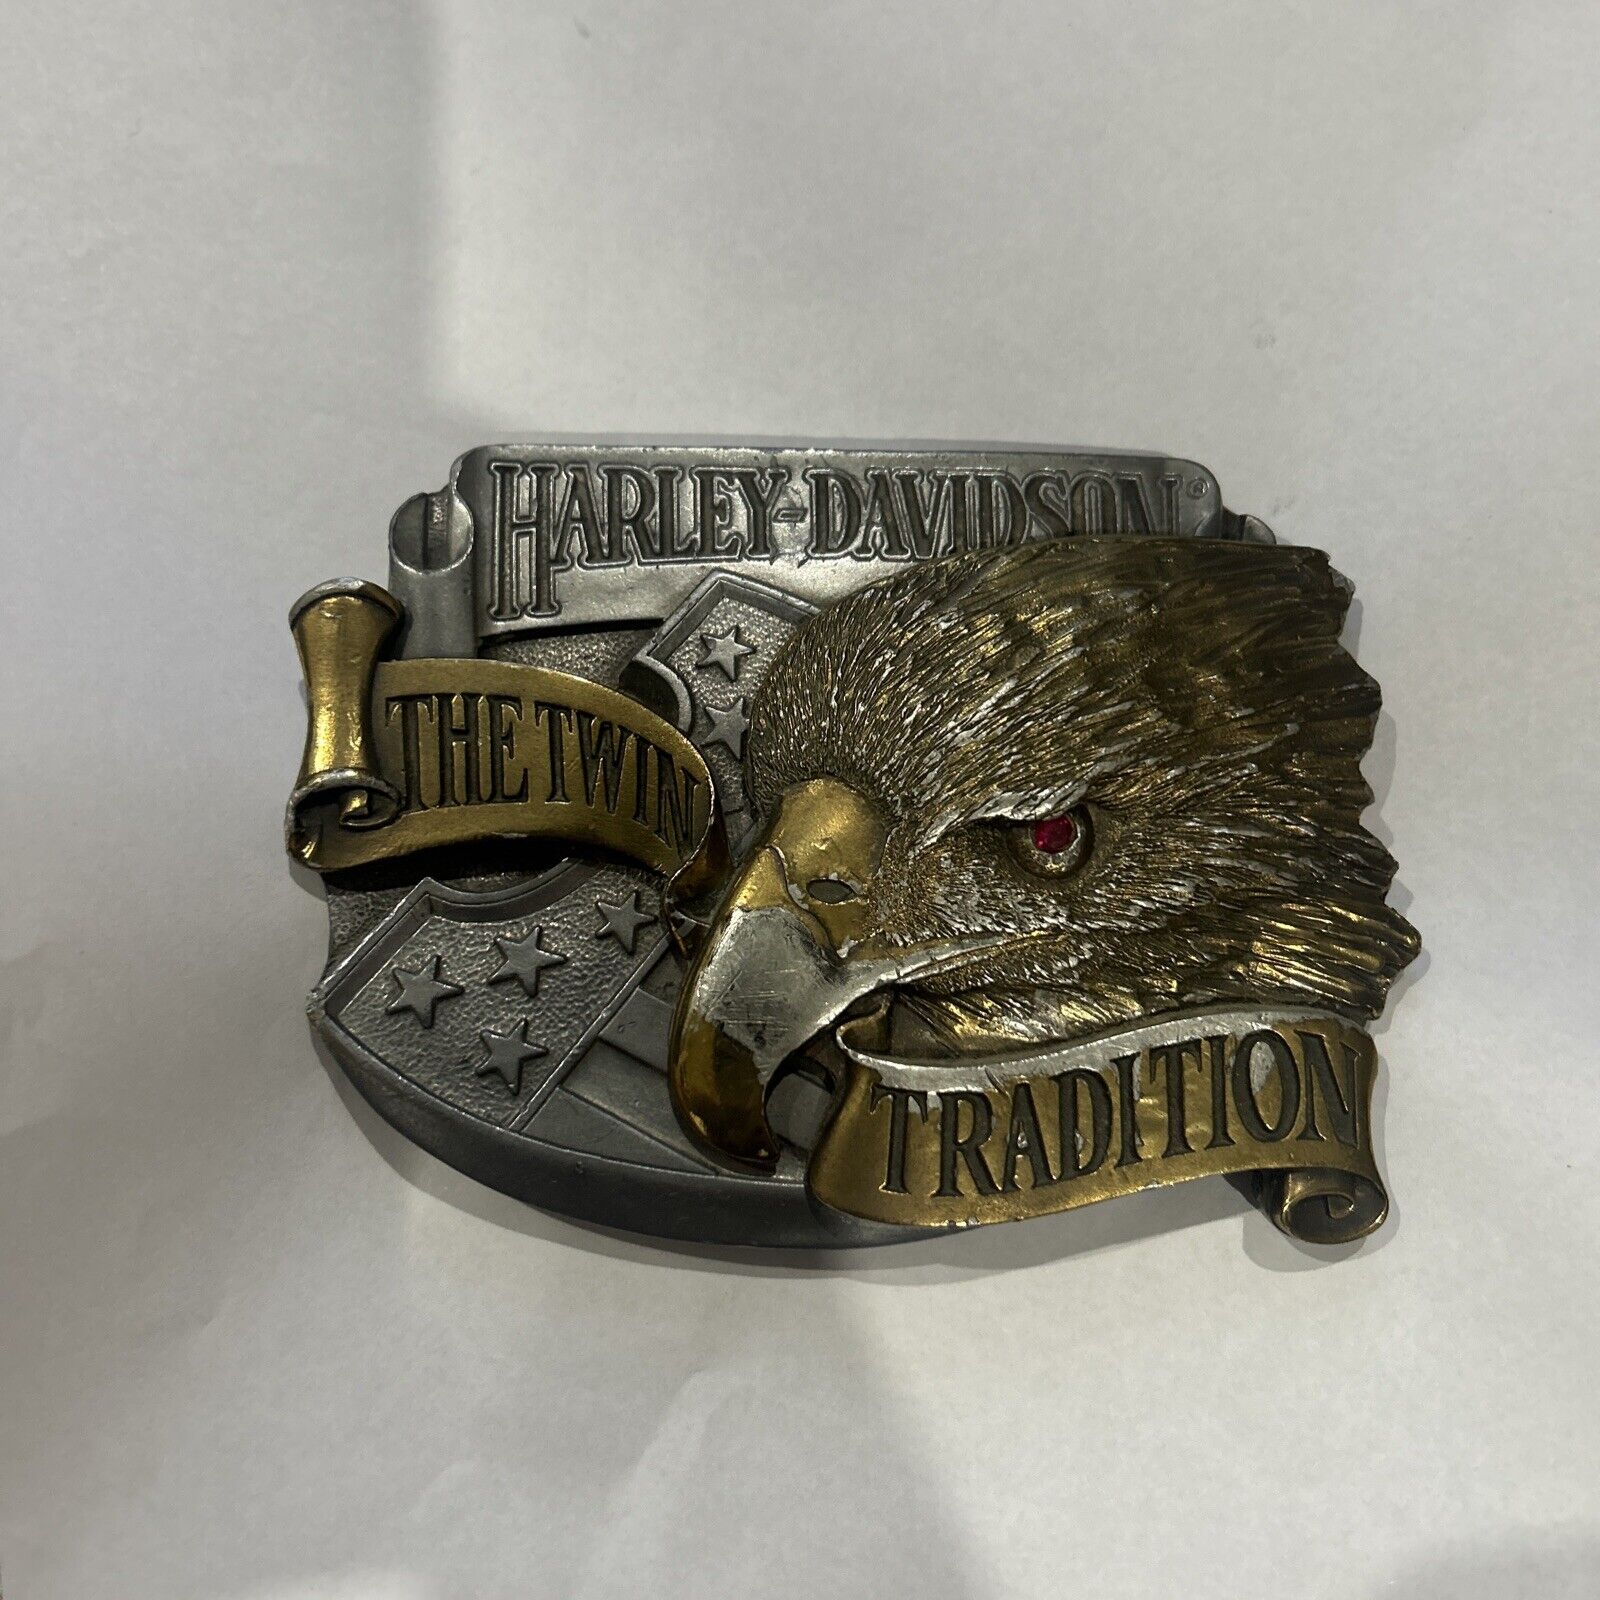 Harley Davidson - The Twin Tradition - Belt Buckle - #806 Of 3000